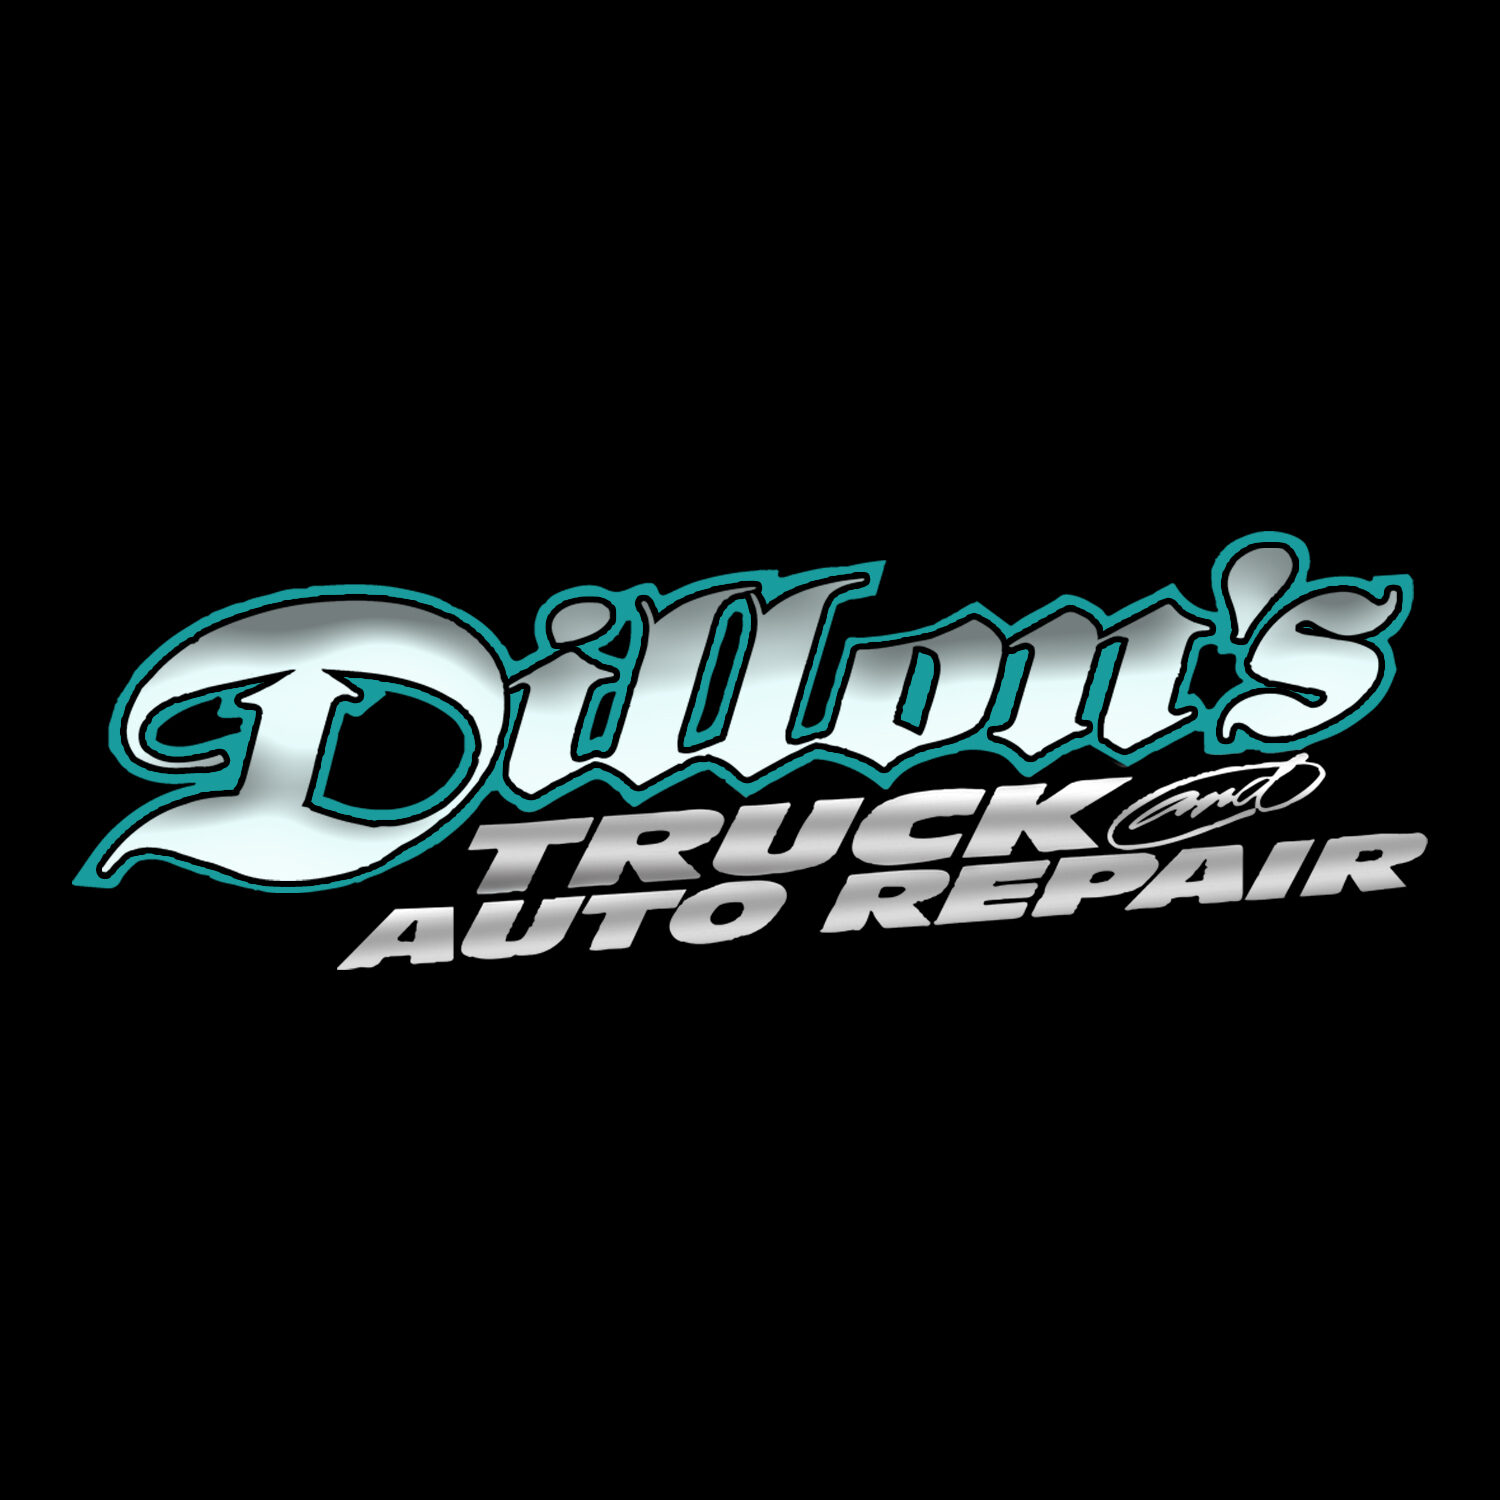 Dillons Auto